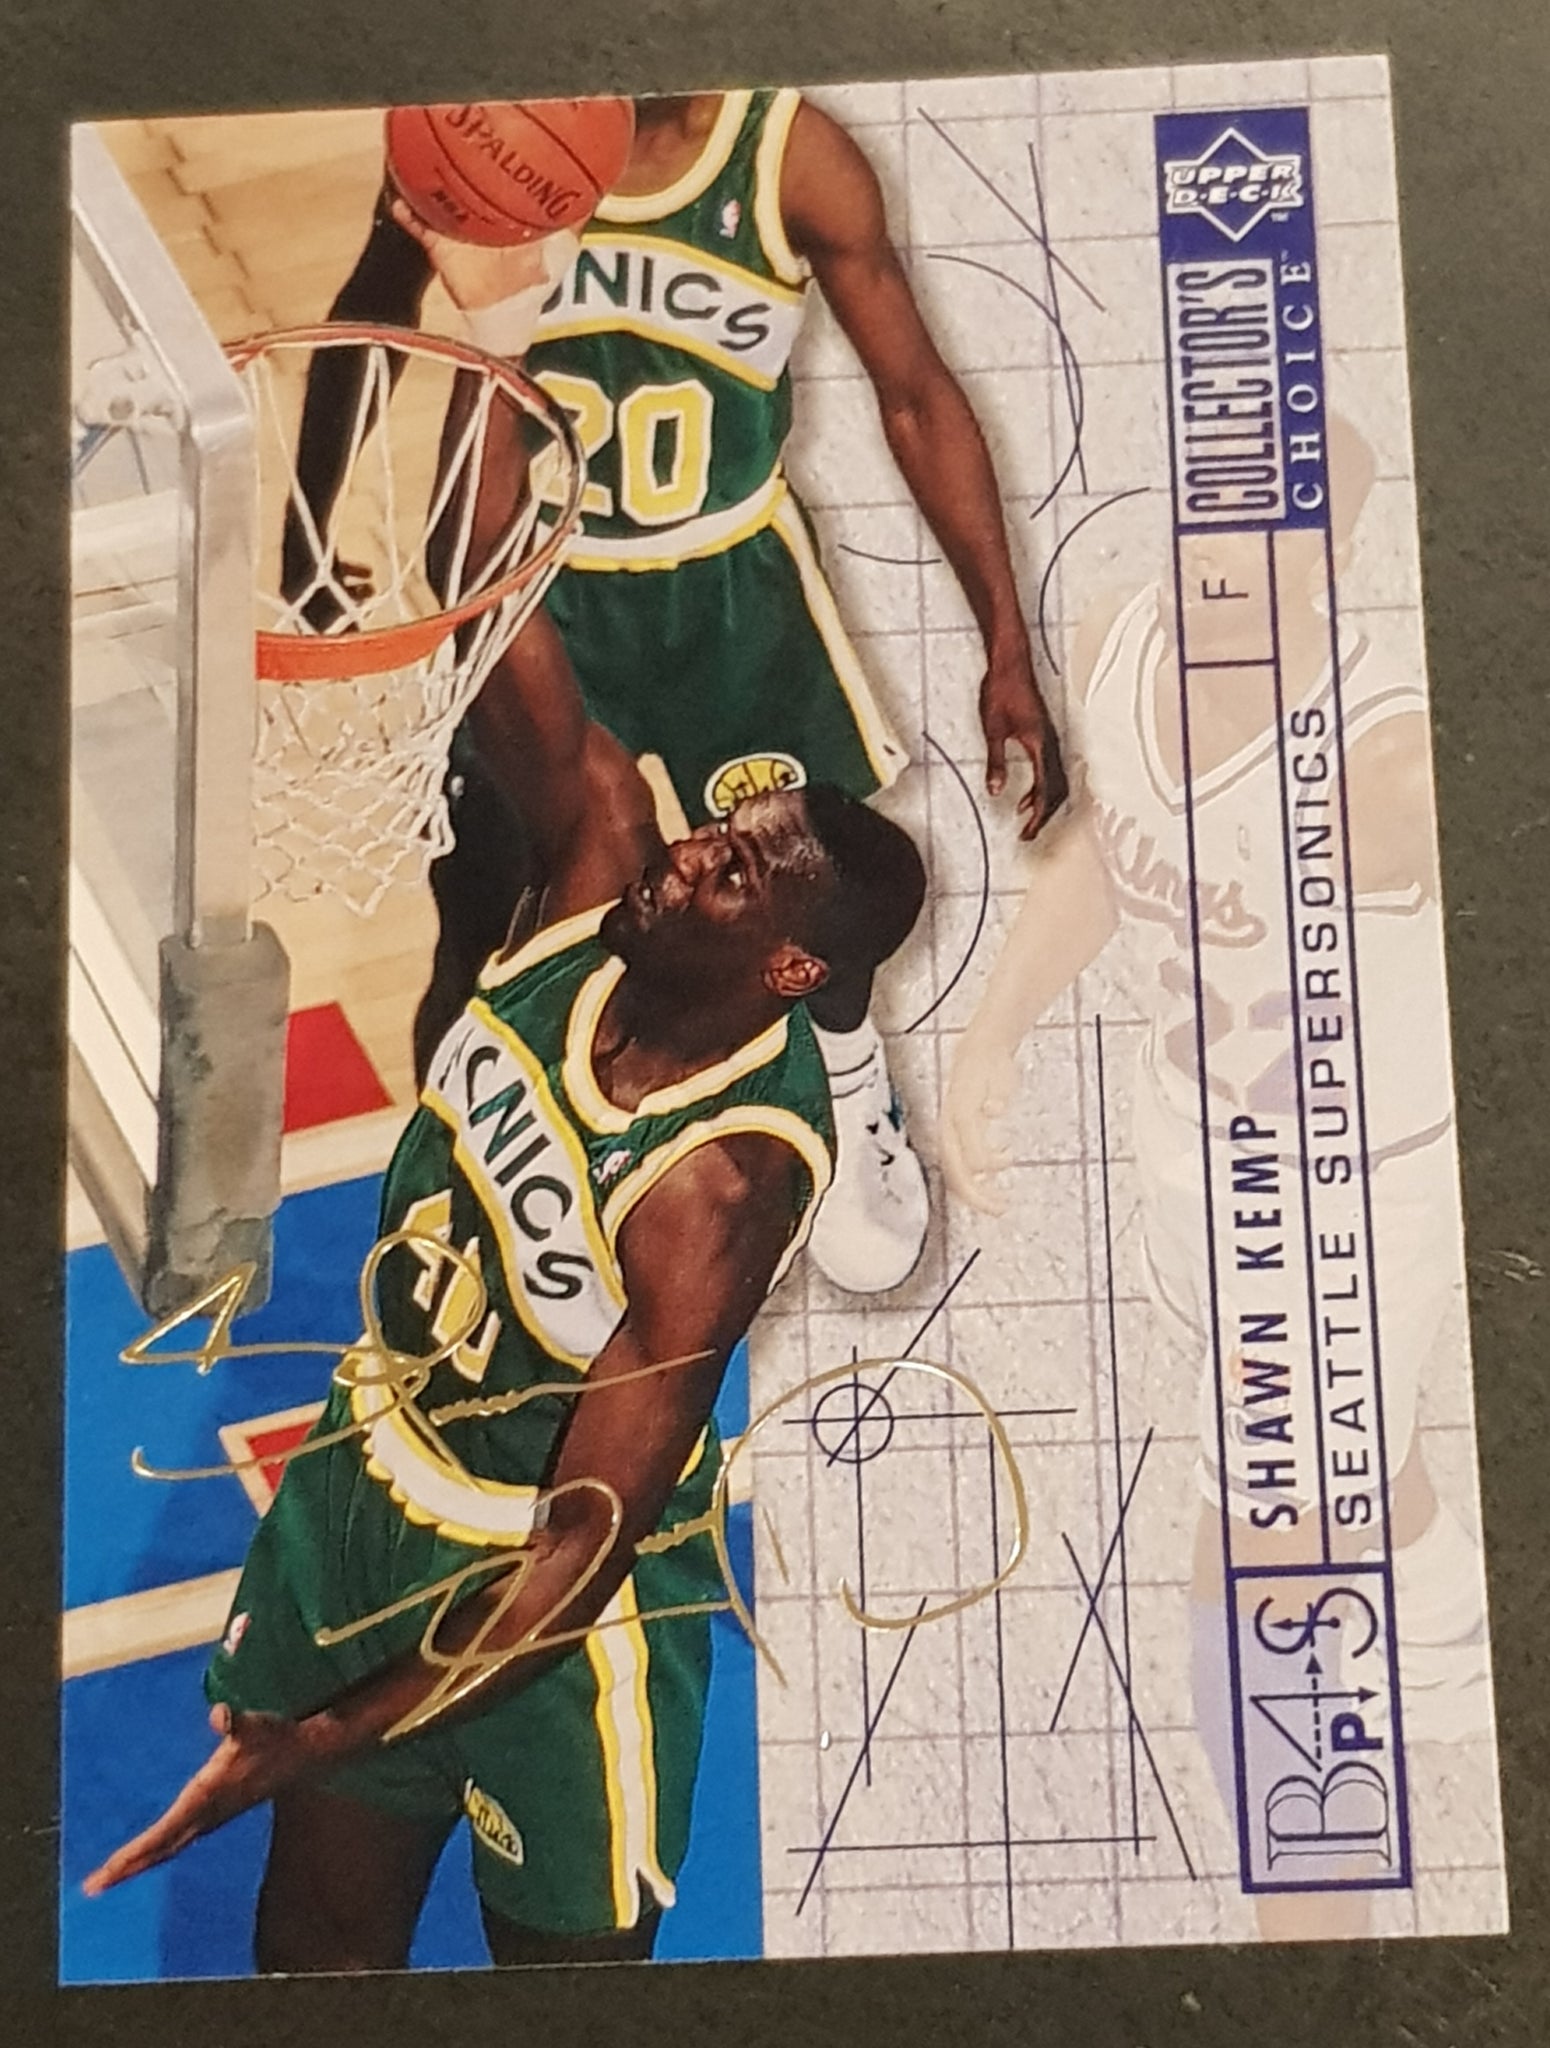 1994-95 Upper Deck Collector's Choice Shawn Kemp #396 Gold Signature Trading Card